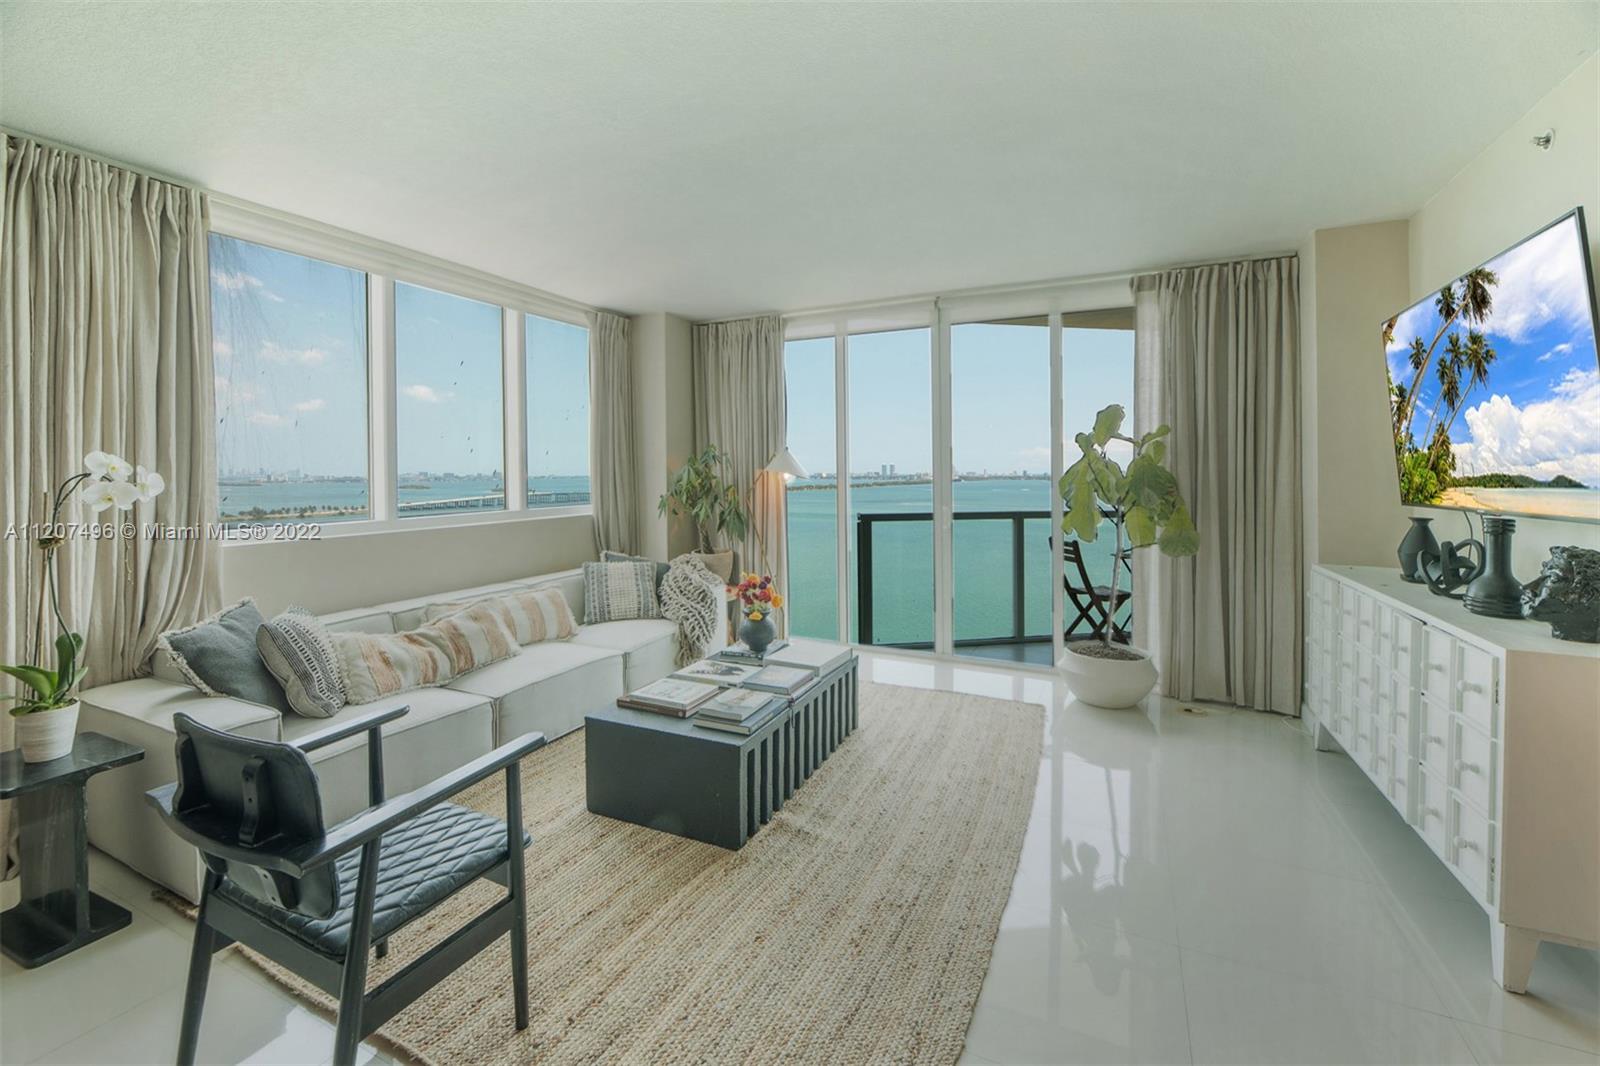 INTRODUCING THE STUNNING 1805-DESIGNED RESIDENCE AT ONYX ON THE BAY.  ENTER TO THE HALLWAY WITH A POWDER ROOM LEADING TO THE GORGEOUS LIVING AND DINING ROOM AREA WITH A OPEN KITCHEN AND BREATHTAKING VIEWS OF BISCAYNE BAY AND MIAMI BEACH SKYLINE. THIS PRISTINELY RENOVATED AND PROFESSIONALLY DECORATED LARGE CORNER UNIT WITH TWO SPACIOUS BEDROOMS W/ EN-SUITE BATHROOMS. LARGE MASTER WITH CORNER BALCONY WITH BEAUTIFUL CITY AND  SUNSET VIEWS. A BOUTIQUE BUILDING WITH GREAT AMENITIES. POOL, GYM, 24 HOURS DOORMAN. PERFECT LOCATION 10 MINUTES FROM SOUTH BEACH, DOWNTOWN MIAMI, WYNWOOD, AND DESIGN DISTRICT. AN AMAZING OPPORTUNITY TO LIVE IN MIAMI IN STYLE.